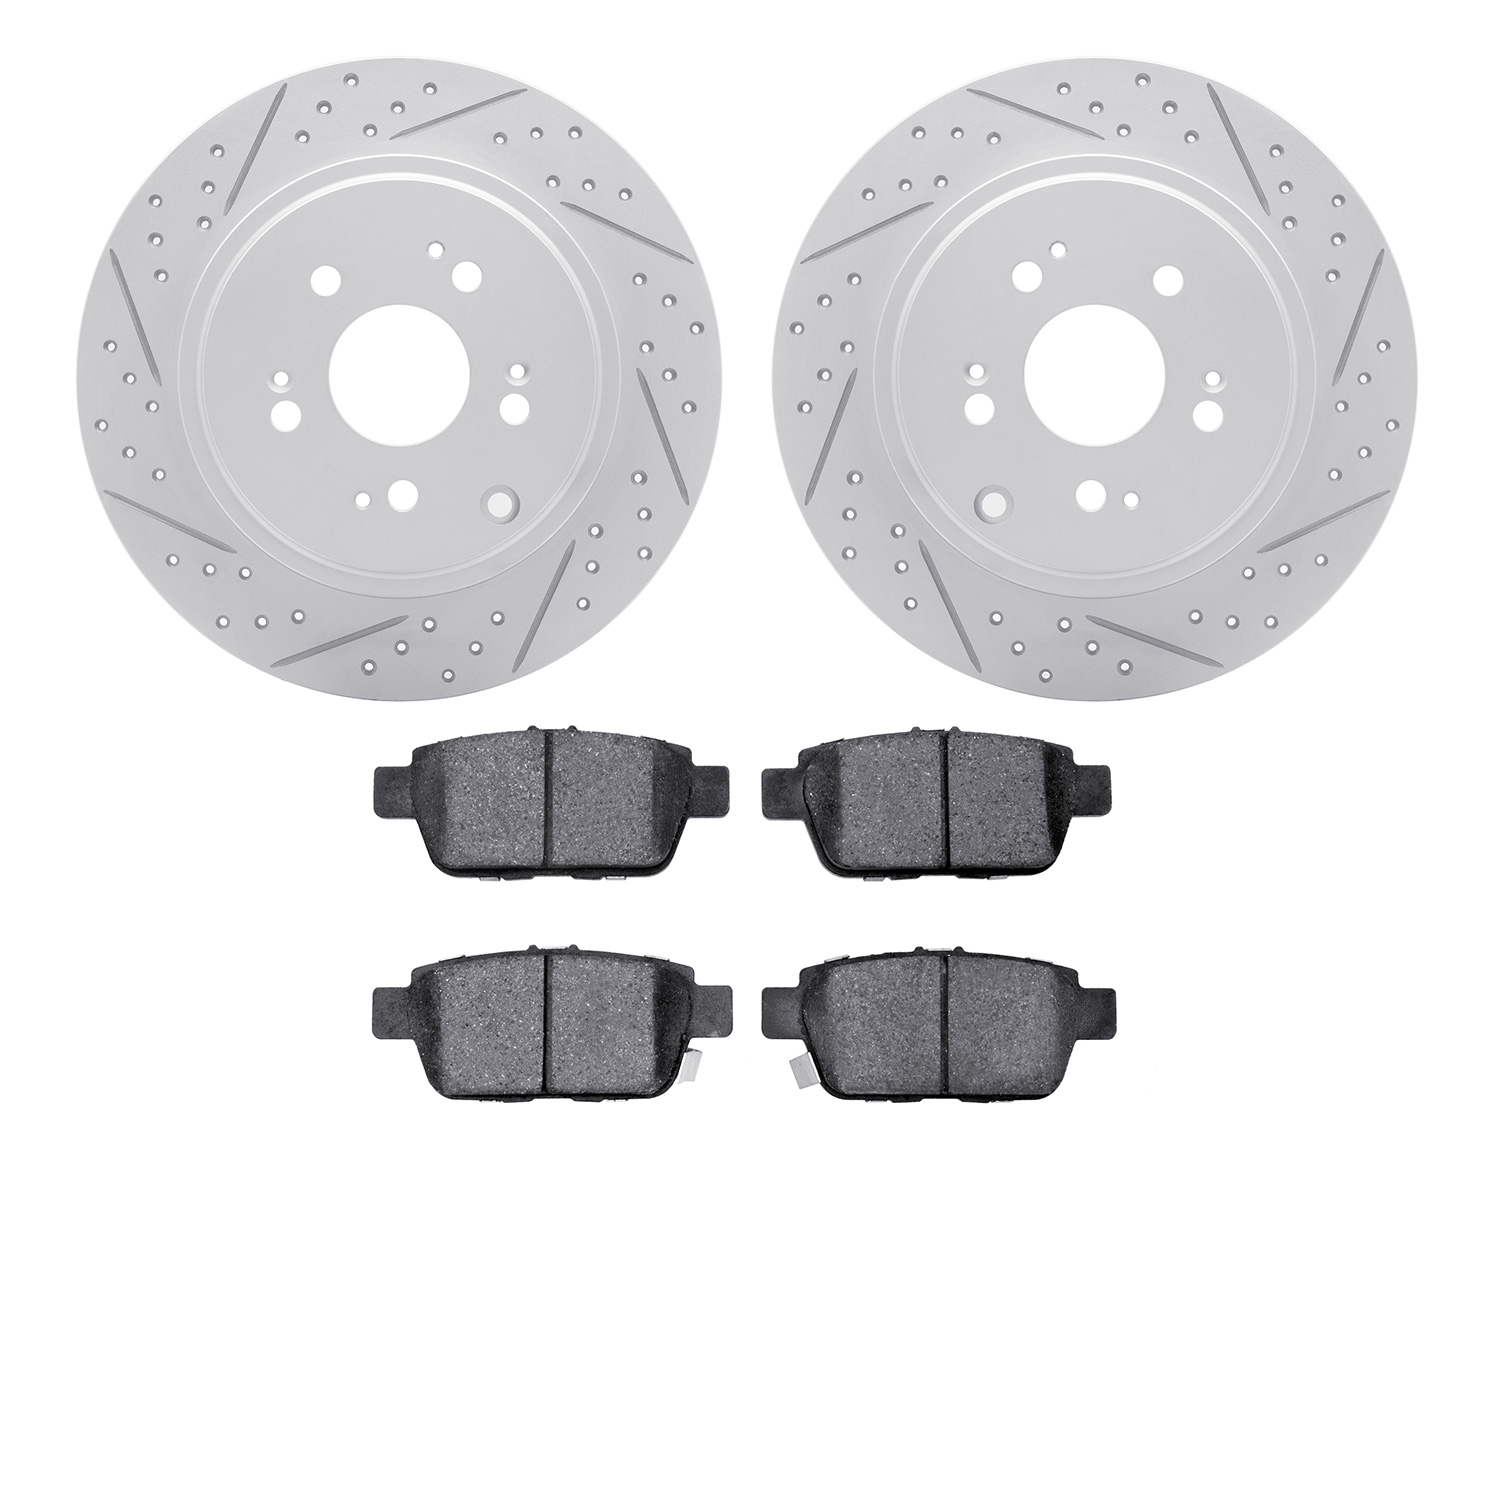 2502-59078 Geoperformance Drilled/Slotted Rotors w/5000 Advanced Brake Pads Kit, 2006-2014 Acura/Honda, Position: Rear